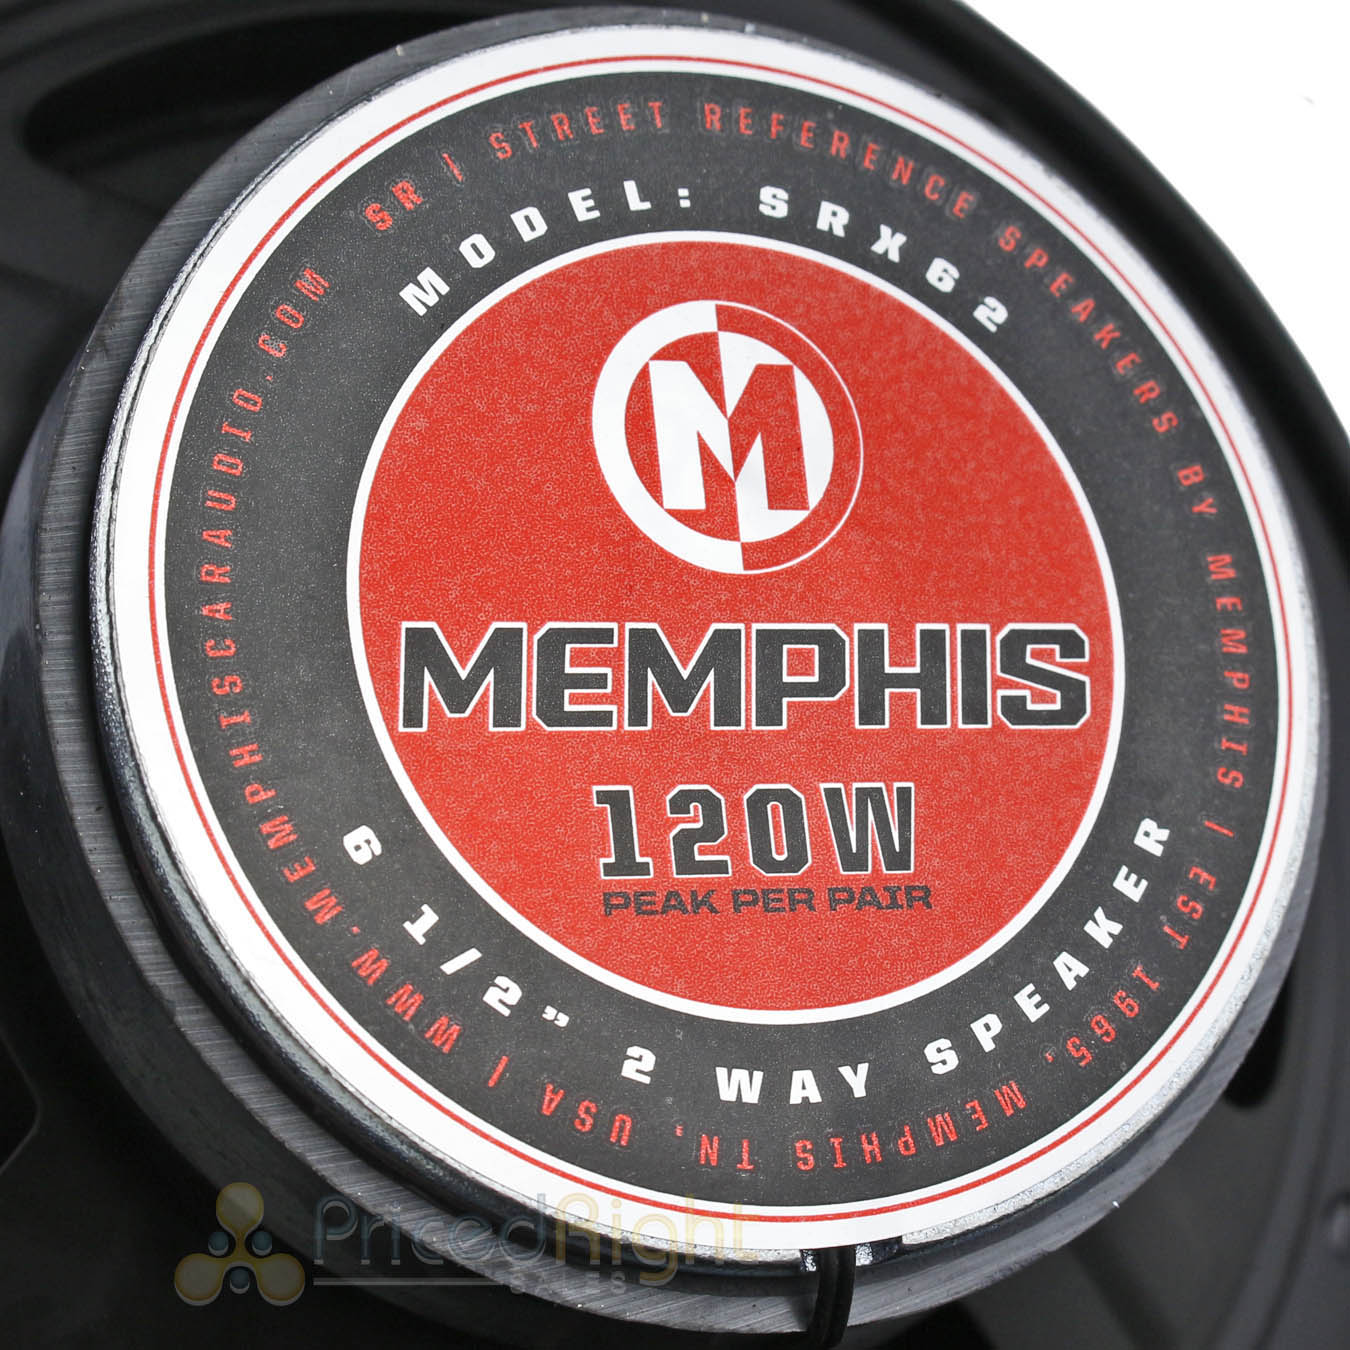 4 Memphis Audio 6.5" 2 Way Coaxial Speakers 60 Watts Max Street Reference SRX62